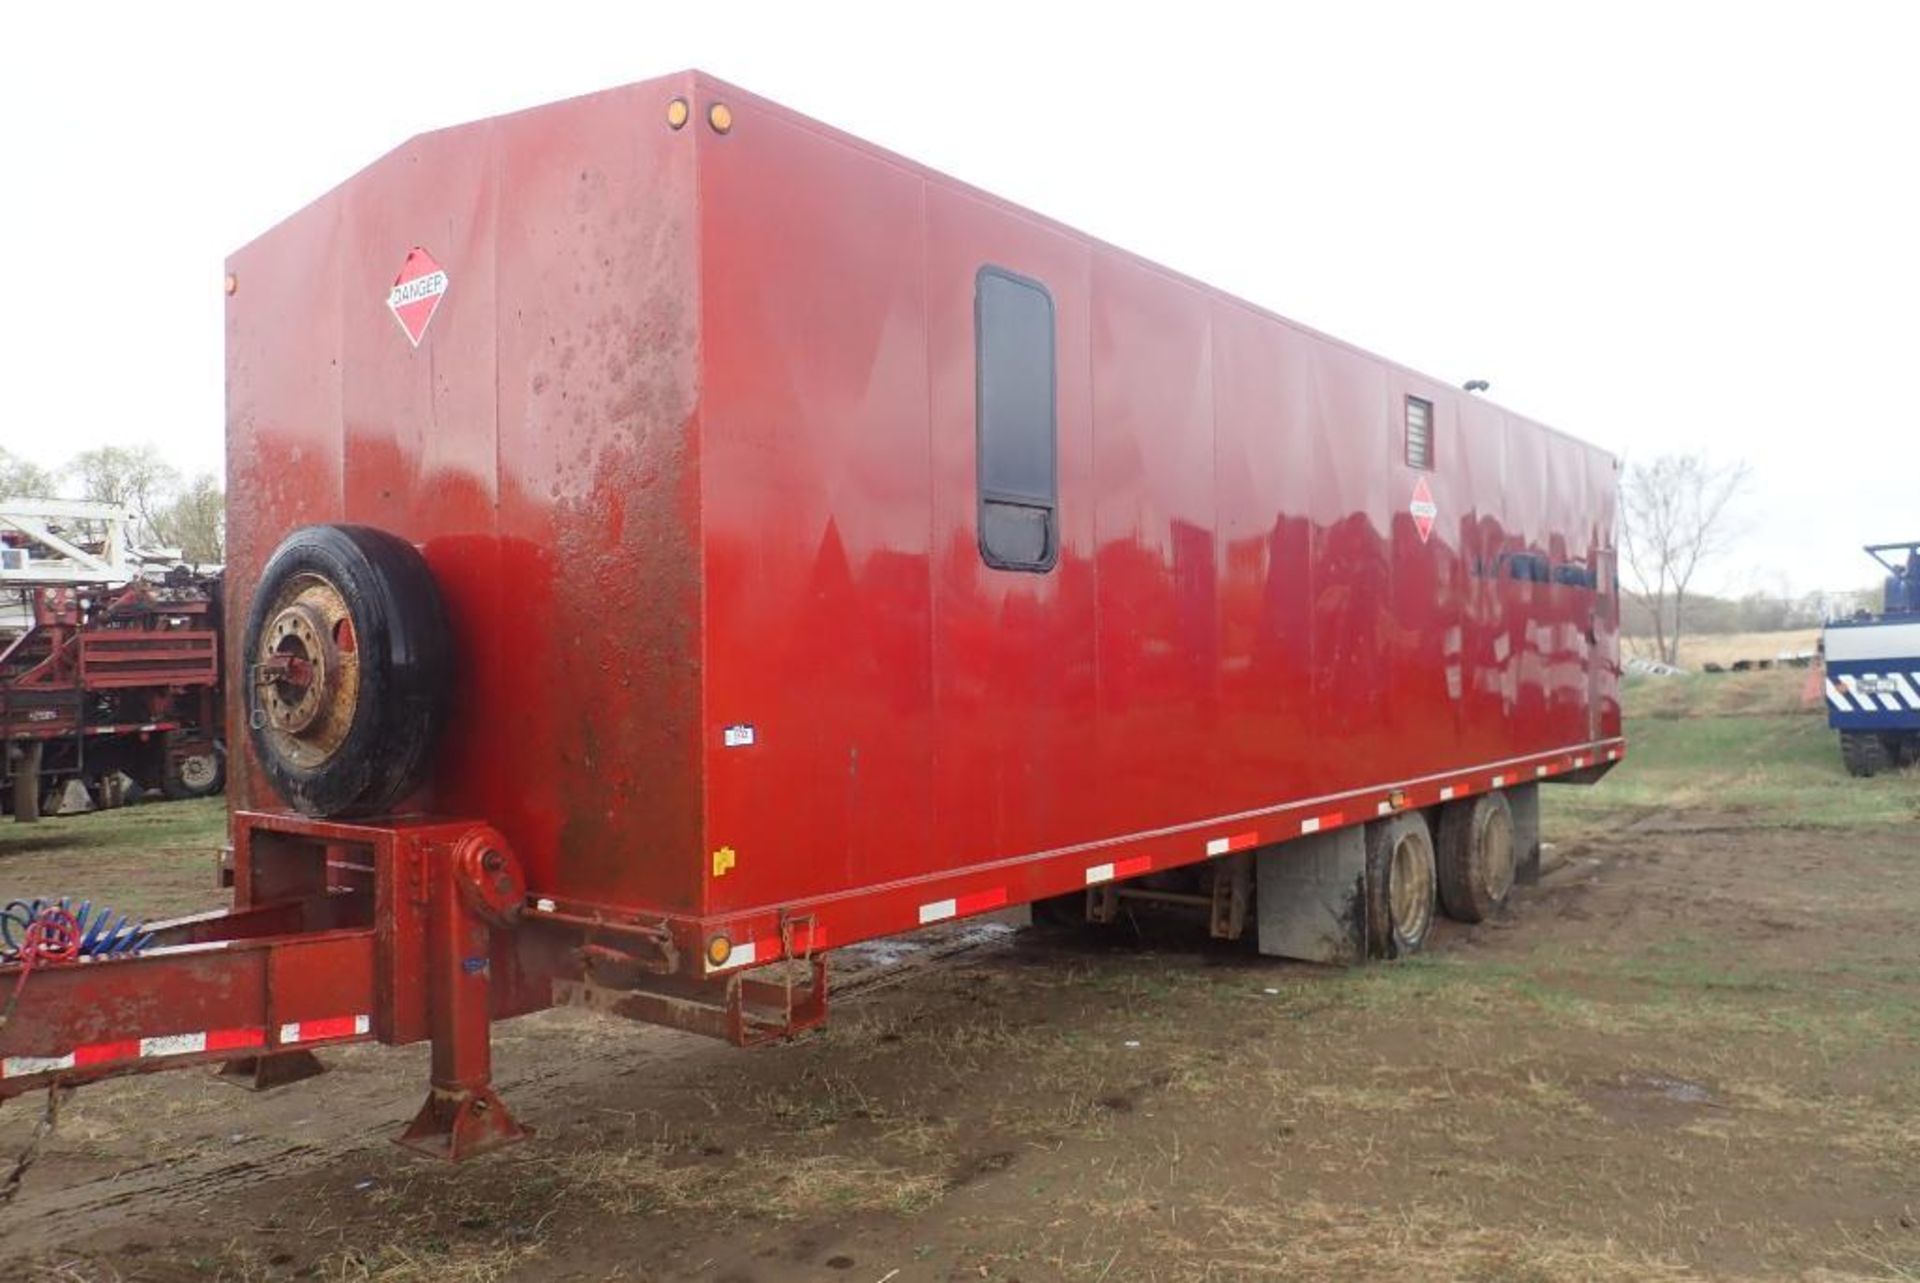 2006 Trailer Mounted Tandem Axle Doghouse, VIN MWS2010004.